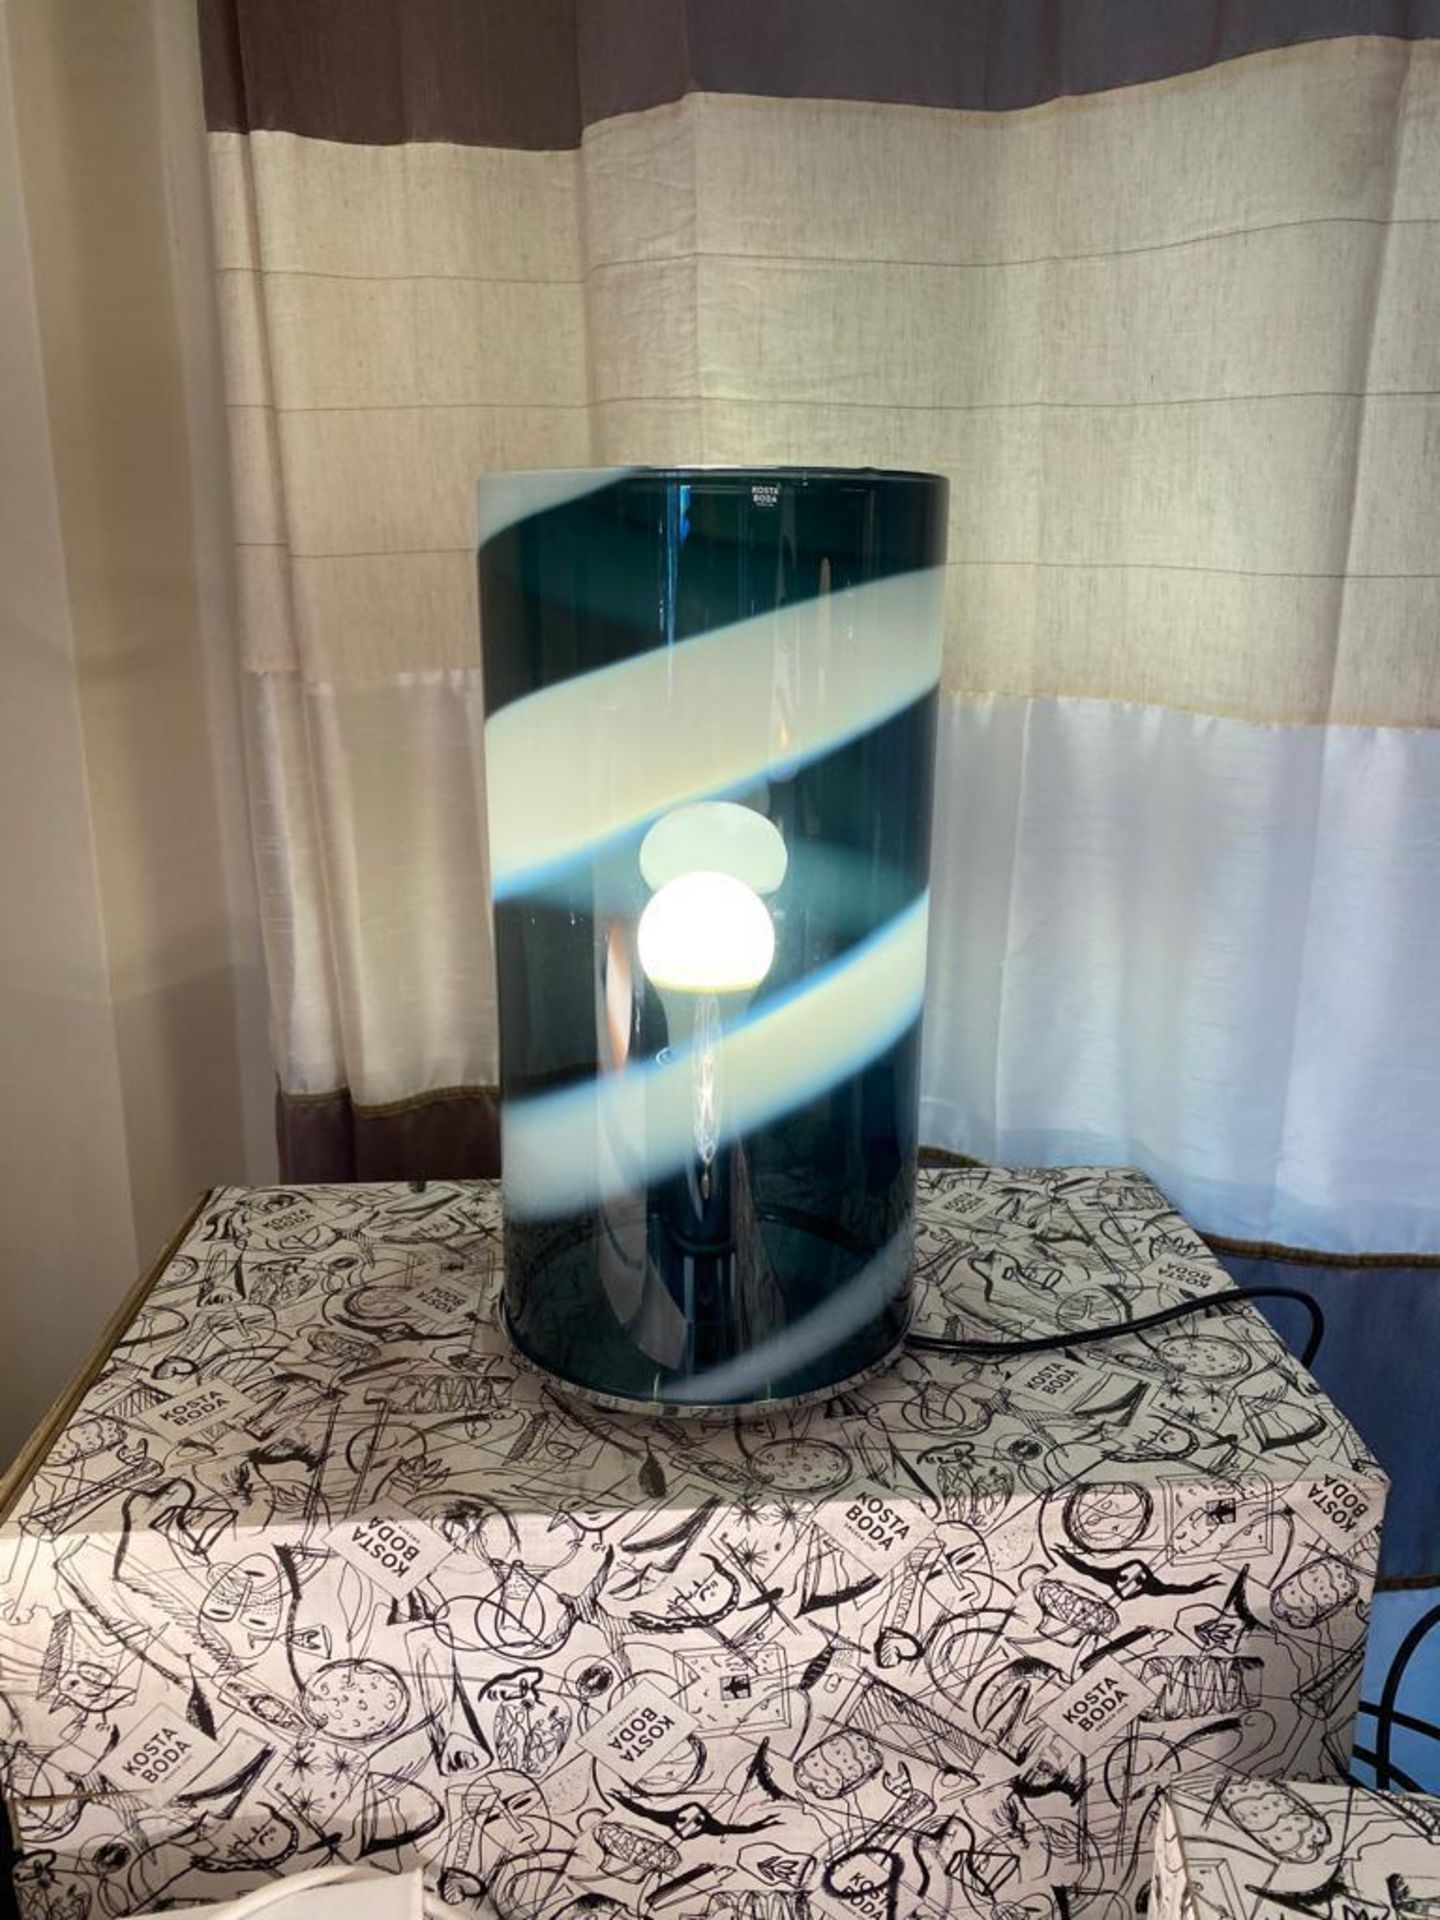 *BRAND NEW* Kosta Boda lamp Black with white swirls. Lamp included.  - Image 2 of 3